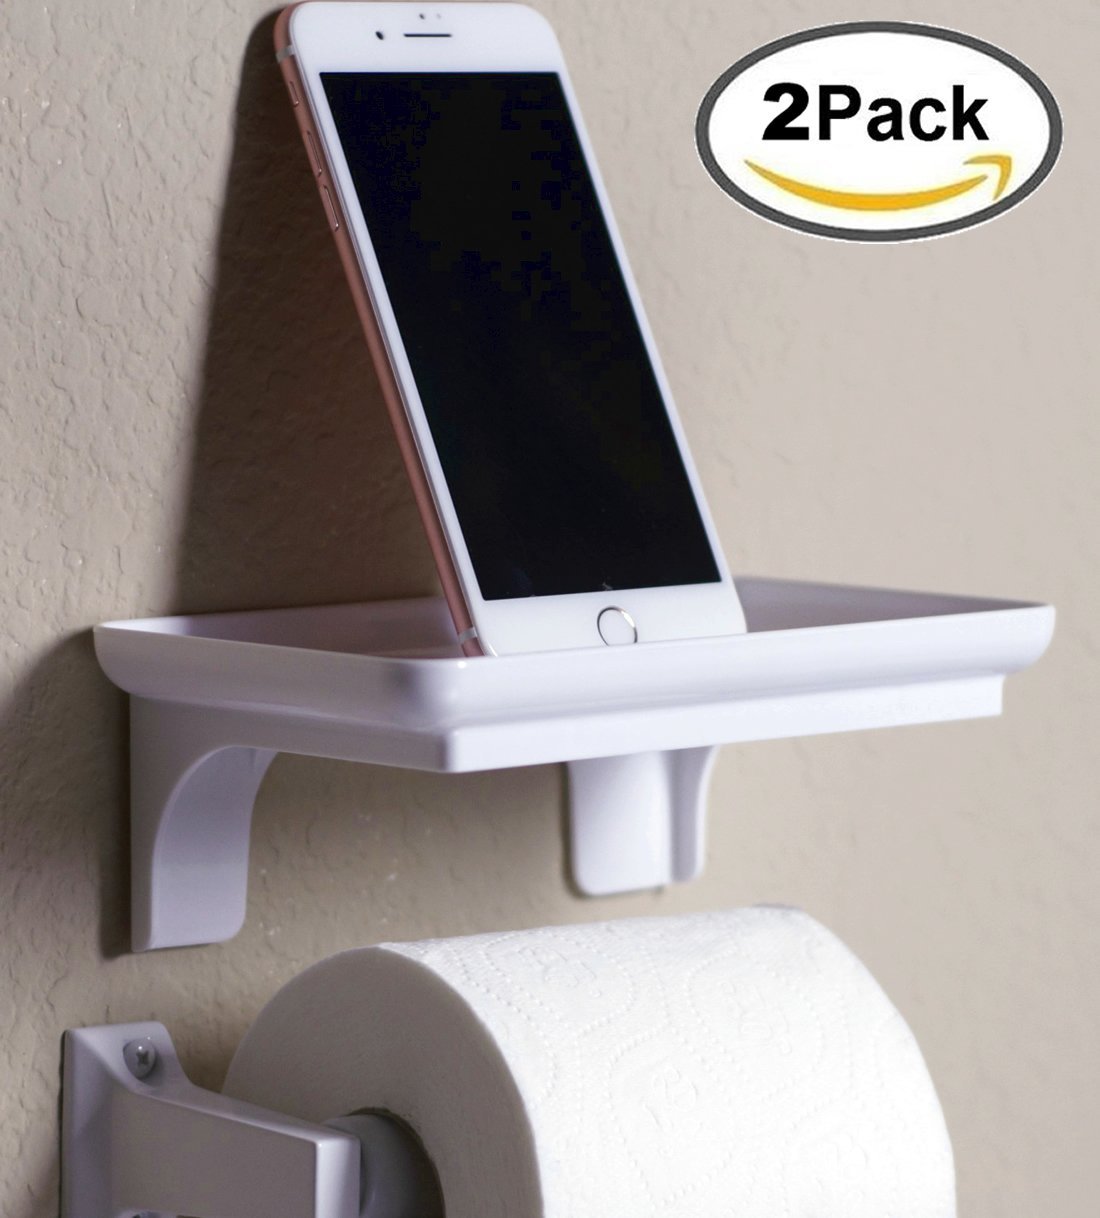 Don't get caught in the bathroom without a phone rest ever again. We all spend hours scrolling memes on the toilet so why not do it the right way.  <br/><br/> You can pick this up at  <a href="https://amzn.to/2Nb5zse" target="_blank">Amazon for about $14.99</a>.